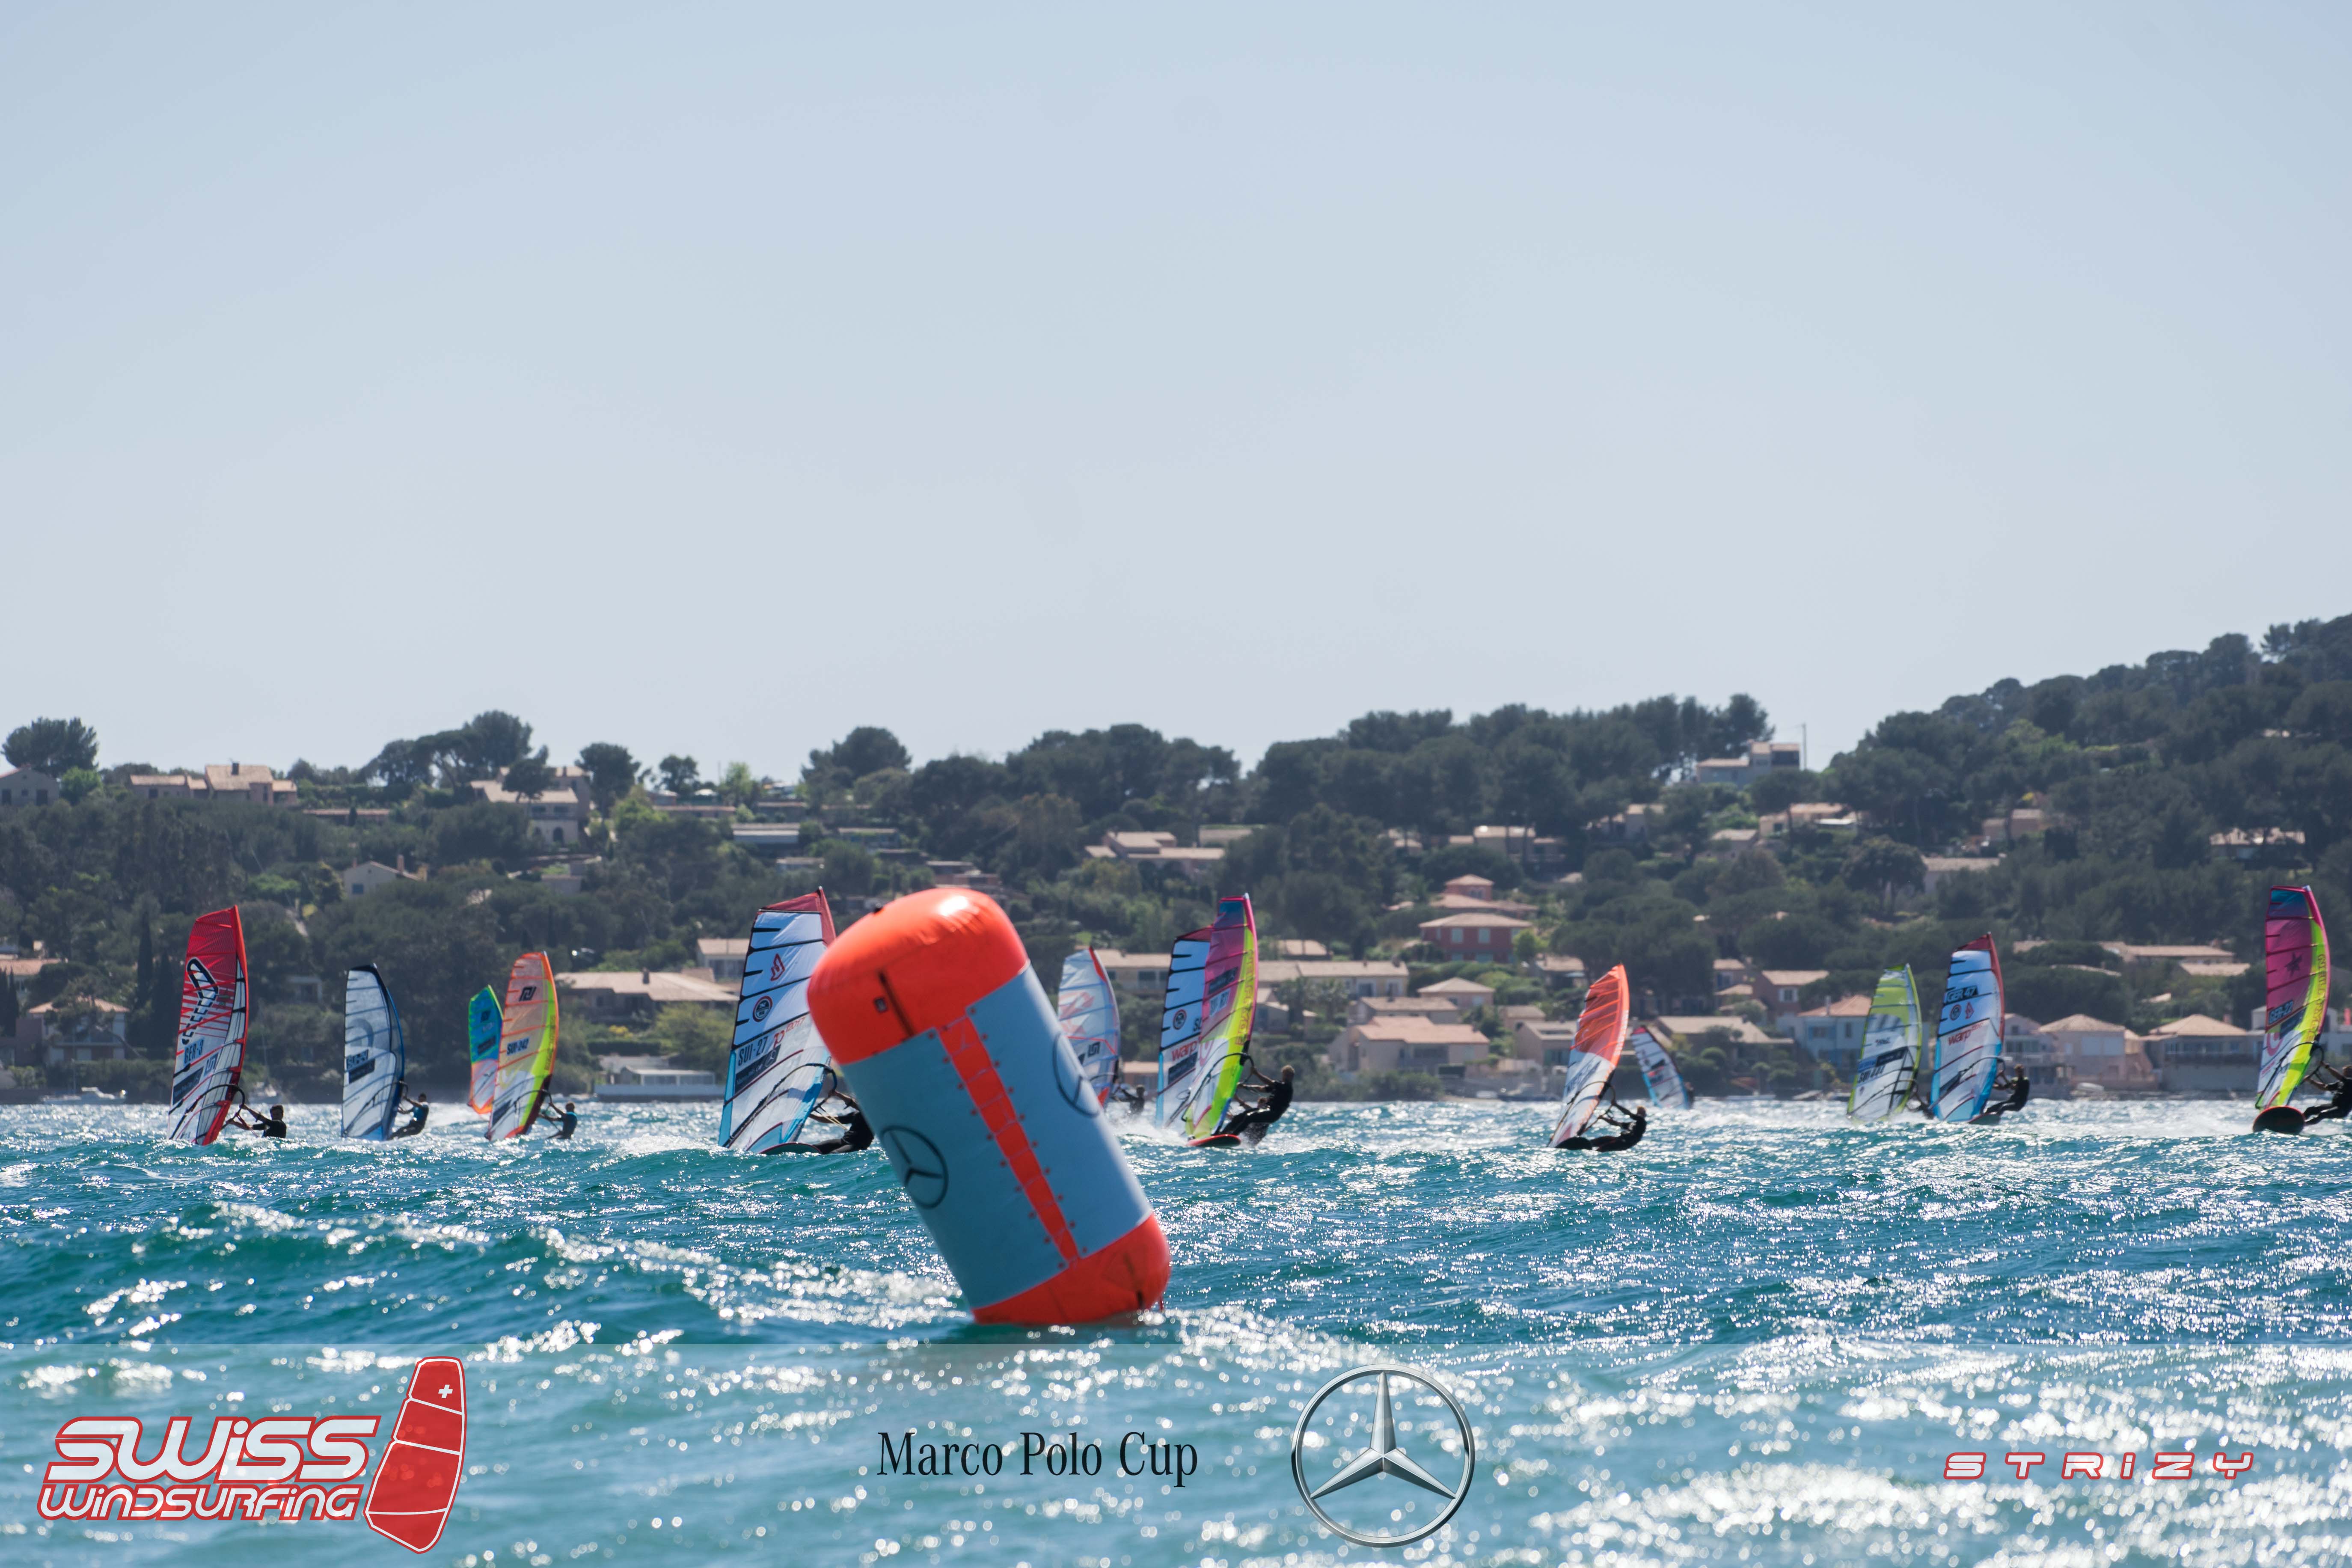  Windsurfing  Marco Polo Cup  Slalom  Hyeres FRA  Final results, the Swiss